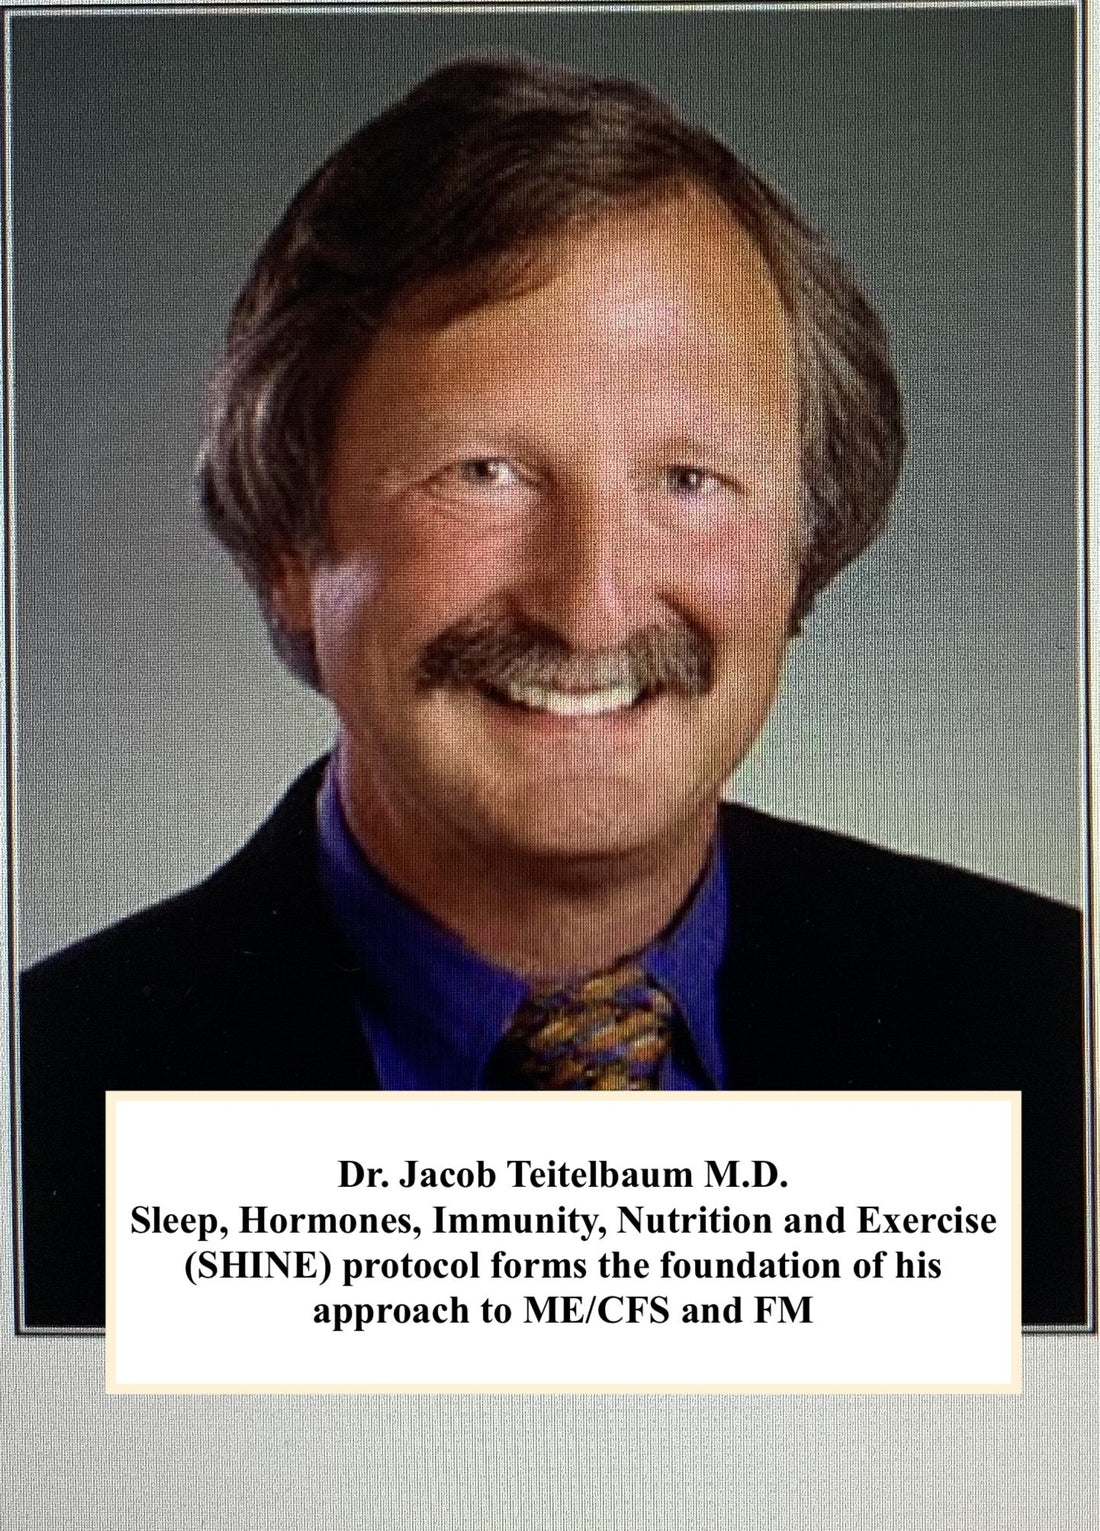 JACOB TEITELBAUM M.D.: "THE TRIAGE THEORY" Vitamins and minerals ensure day-to-day survival!